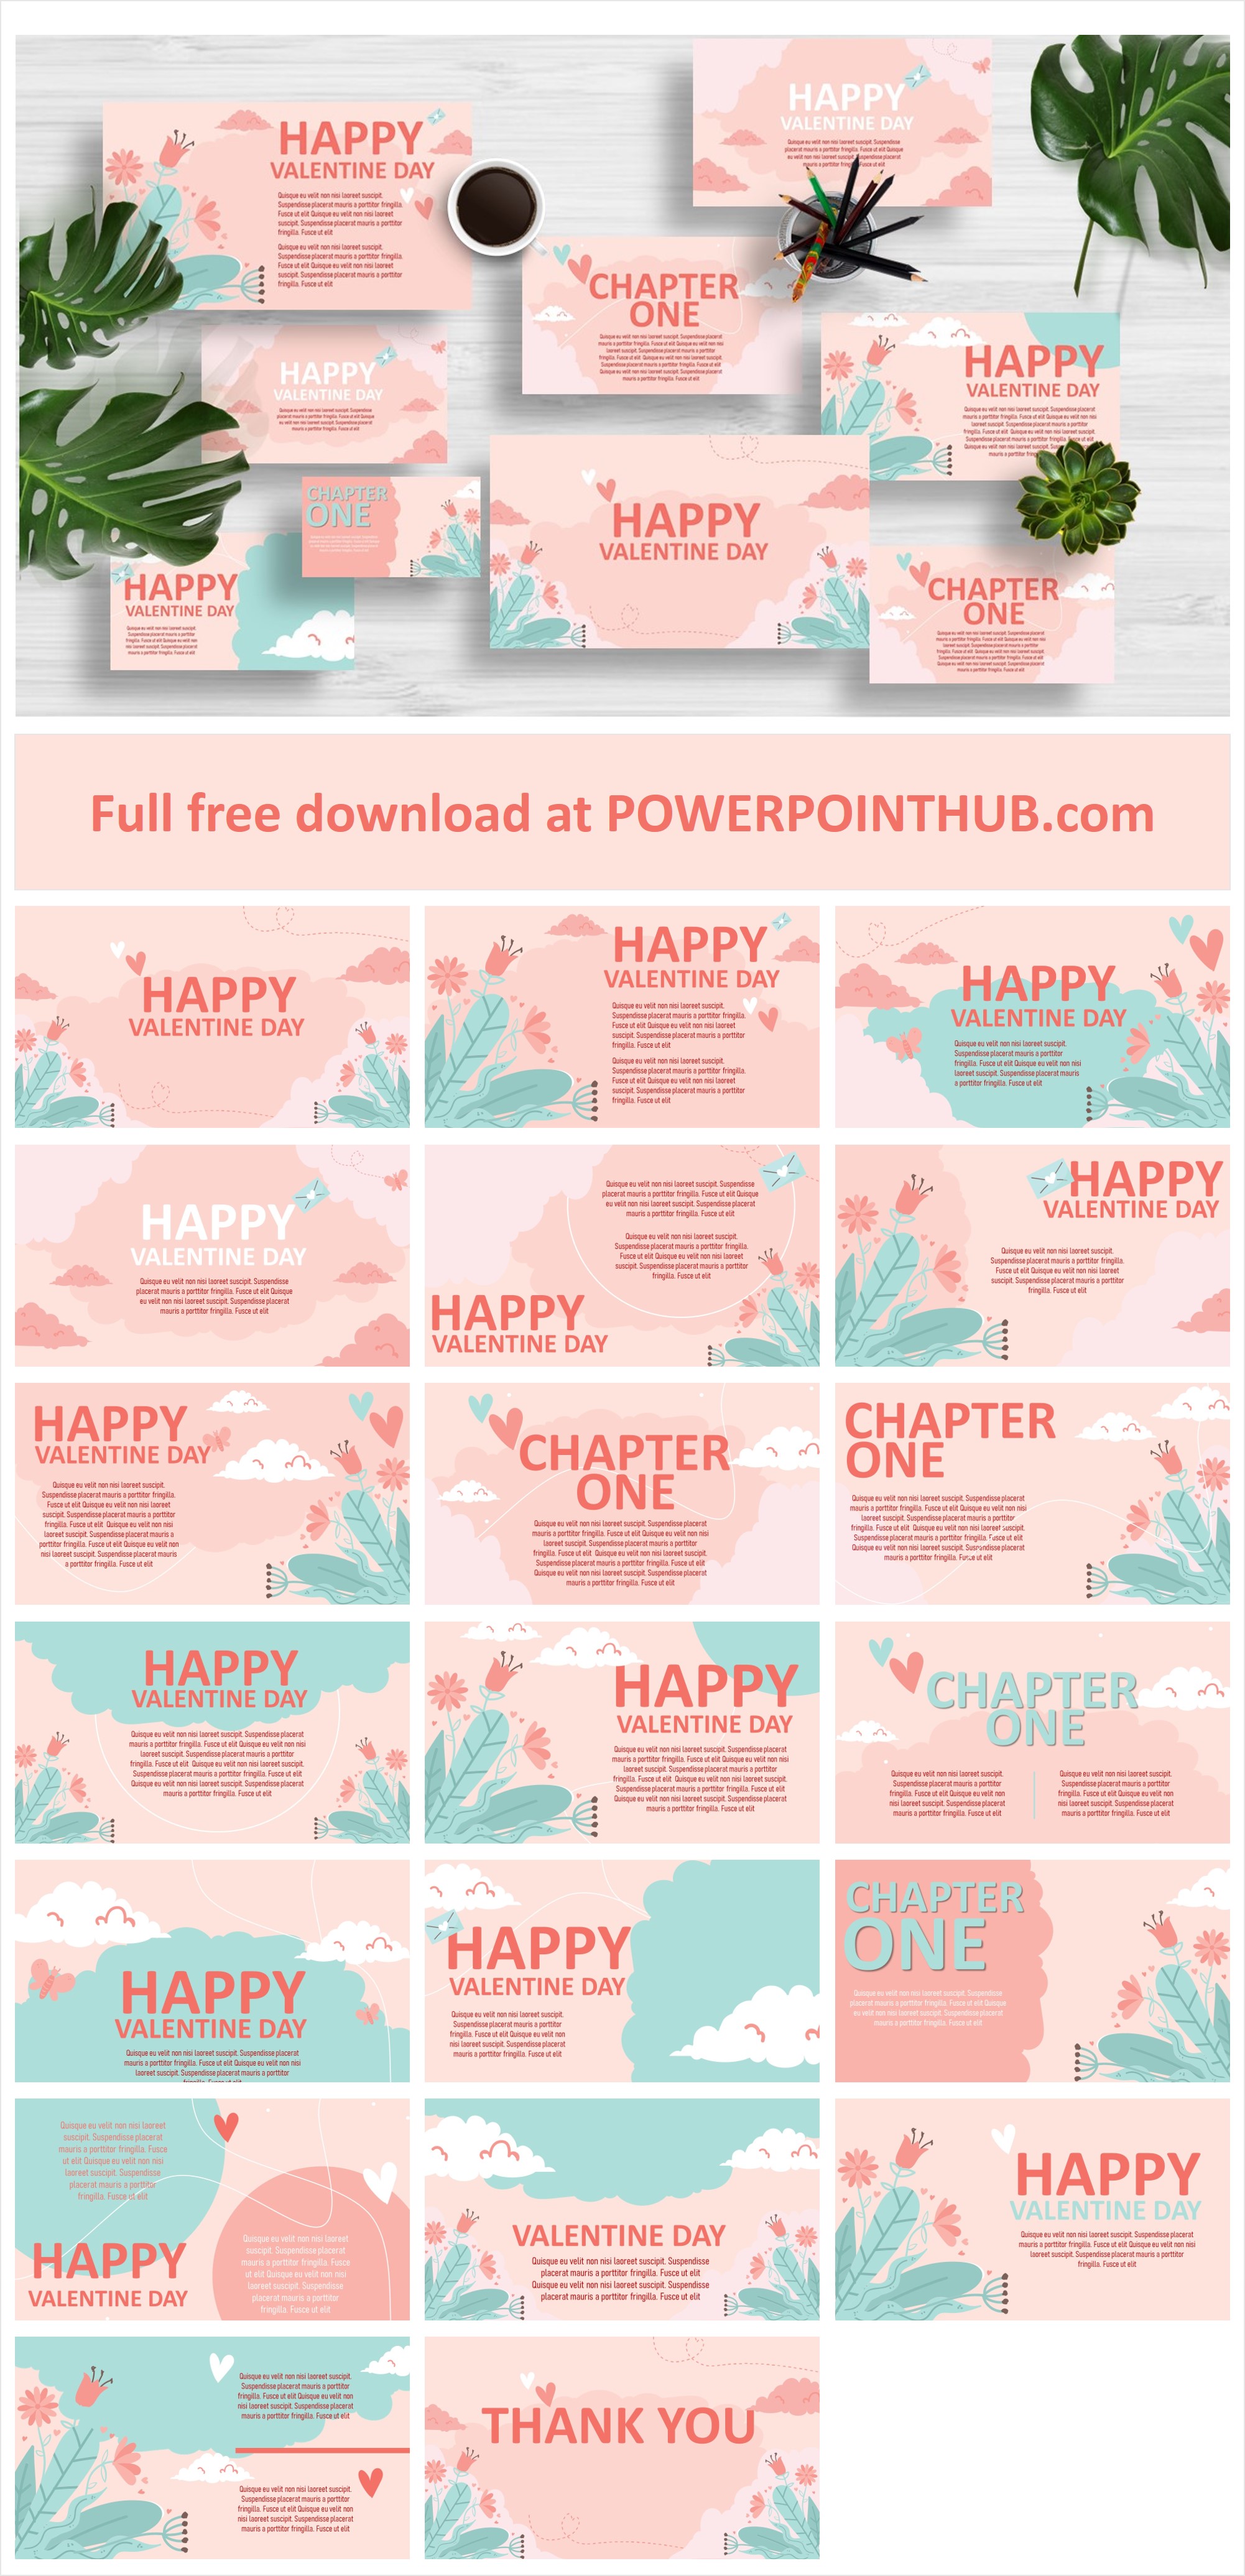 Pastel Free PowerPoint Template with pastel pink and green for Valentine's Day. This is multipurpose pastel presentation. 